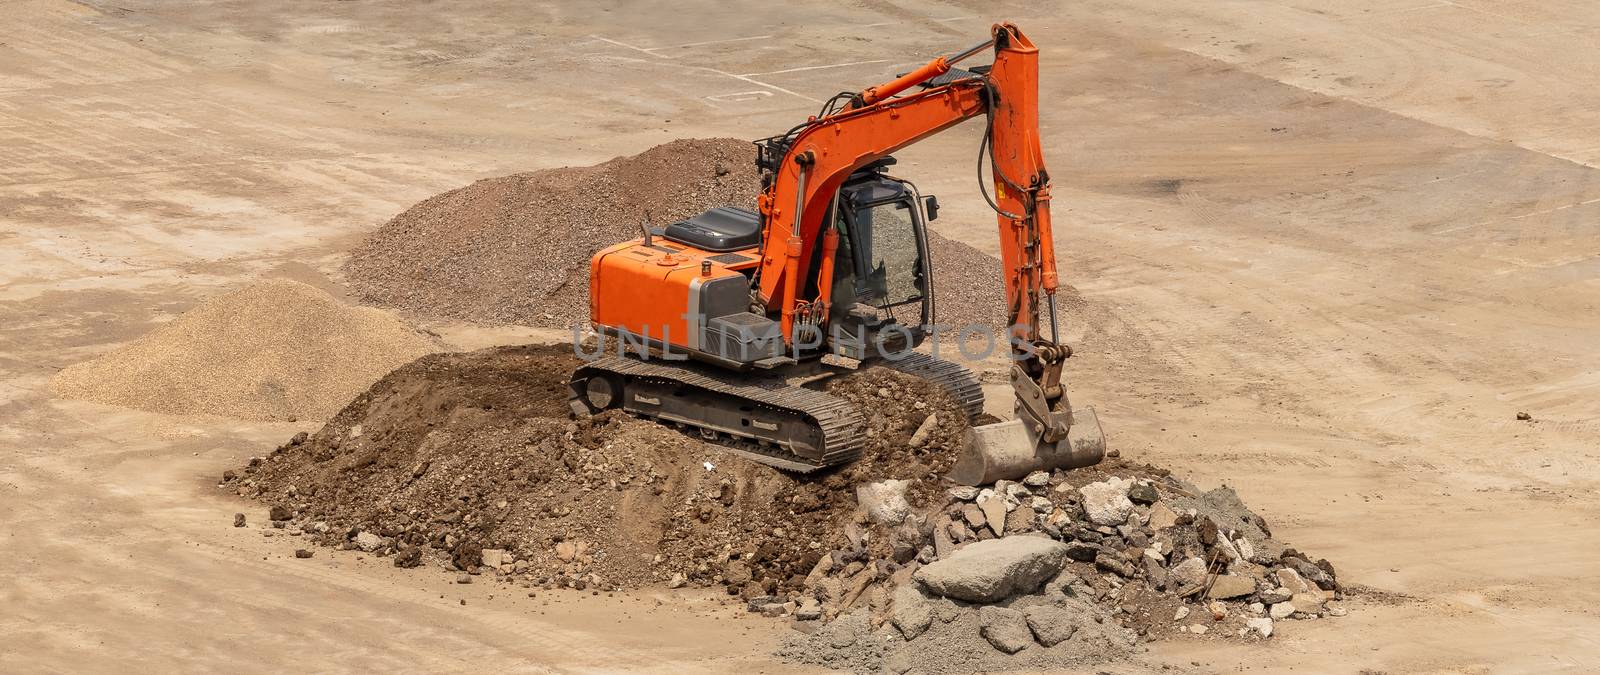 Old orange excavator parked on top of a pile of soil and ready to dig. Rocks lying around. Construction site. Aerial angled view.